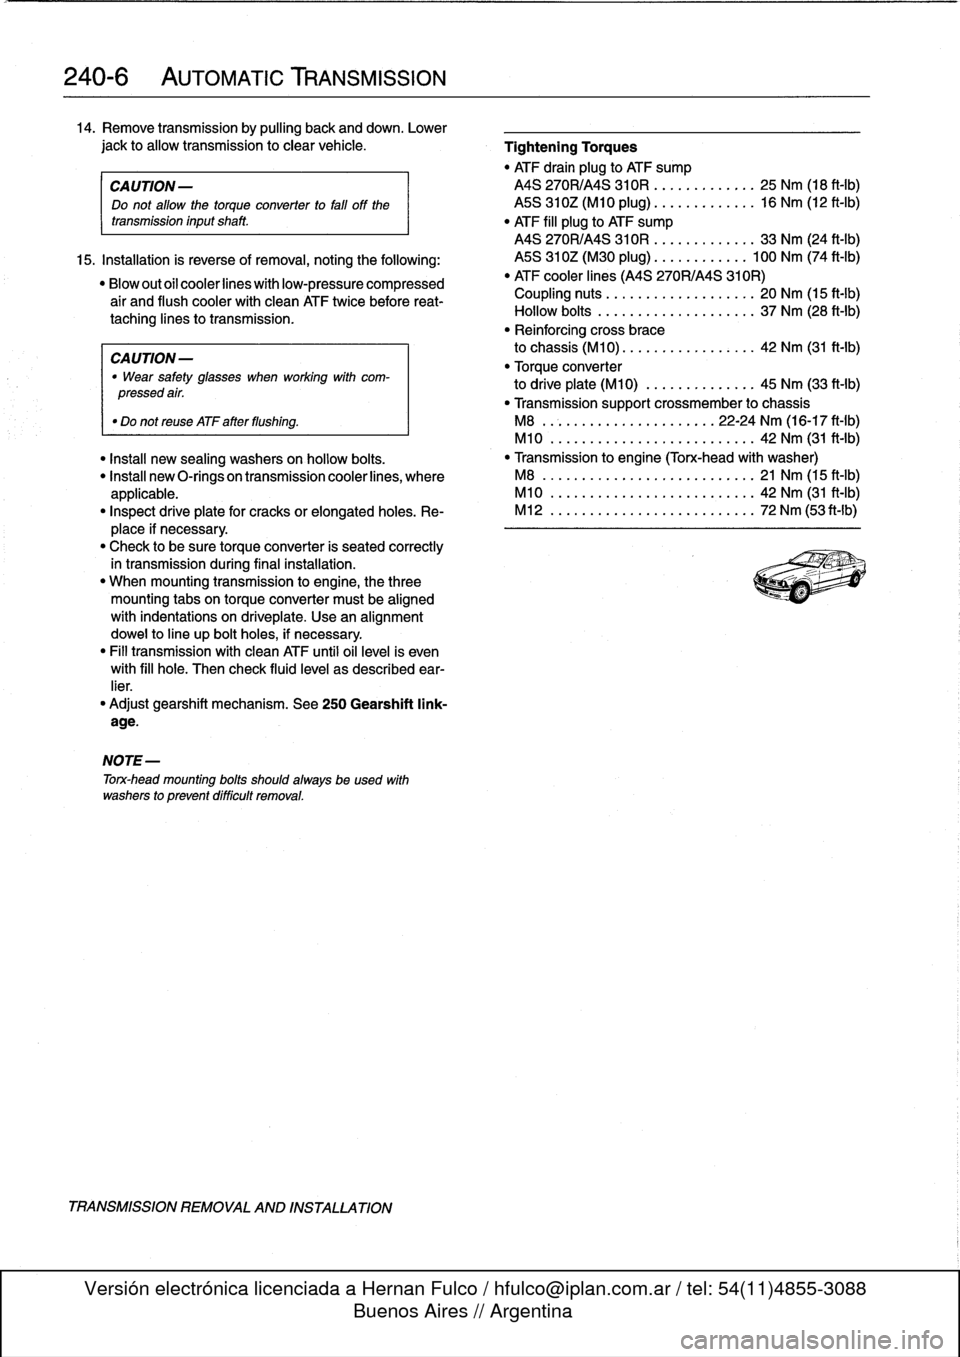 BMW M3 1993 E36 Workshop Manual 
240-
6

	

AUTOMATIC
TRANSMISSION

14
.
Remove
transmission
by
pulling
back
and
down
.
Lower

jack
to
allow
transmission
to
clear
vehicle
.

	

Tightening
Torques

"
ATF
drain
plug
to
ATF
sump

CA
UT